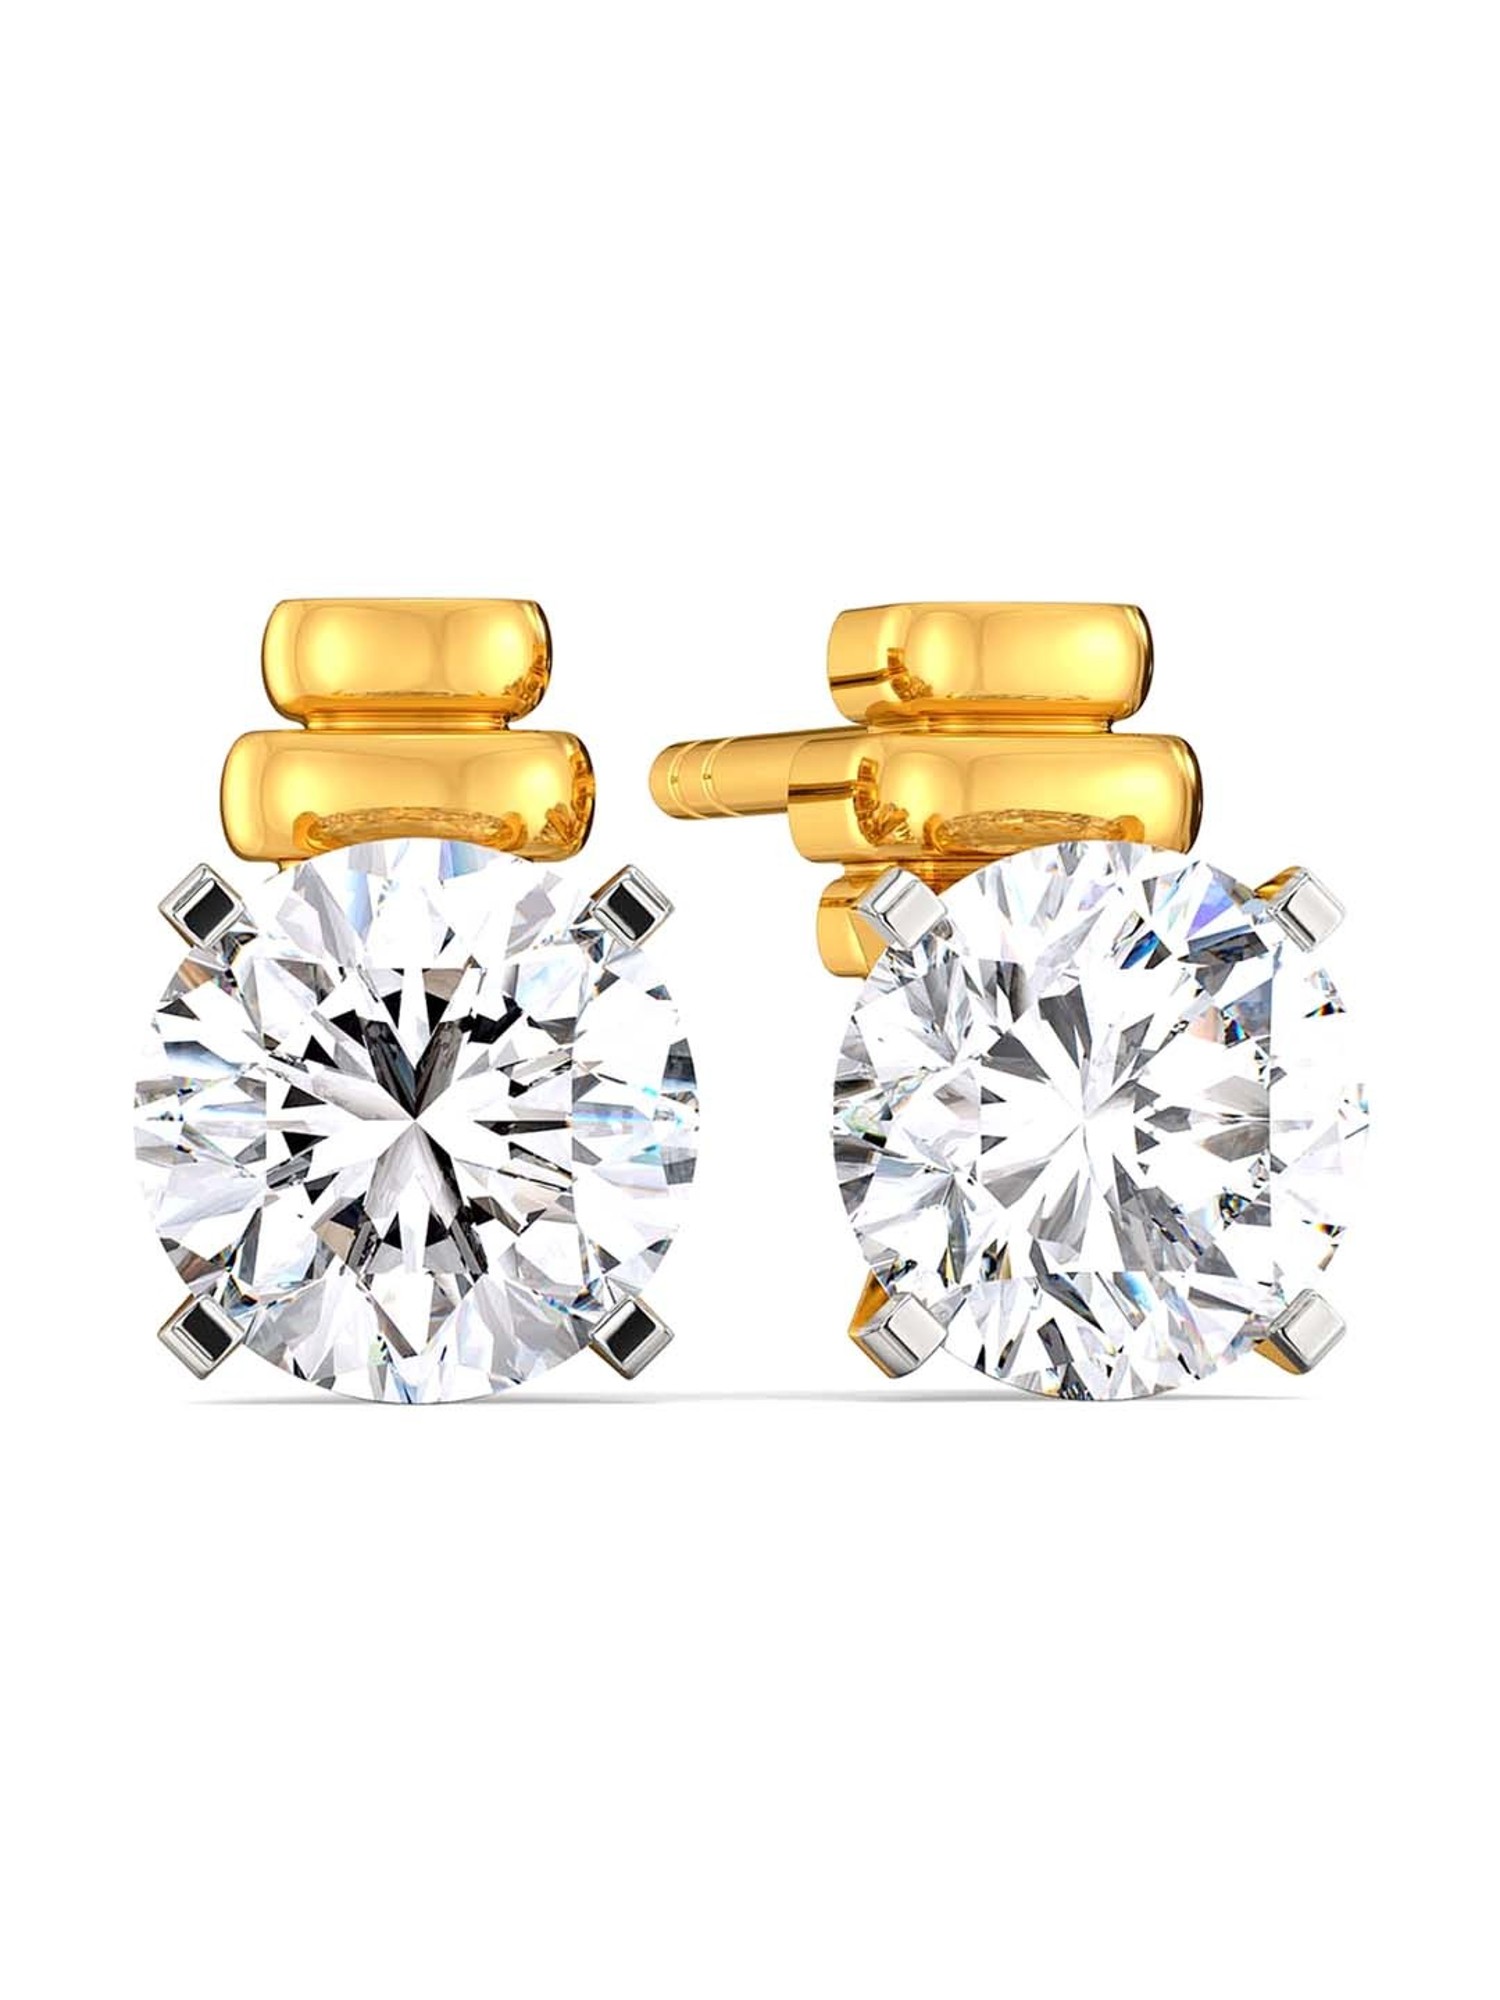 2 Carat Basic must have 4 prong Lab Grown Round Diamond Solitaire Stud  Earrings for Women Certified HI Color VS Clarity in 14K yellow Gold  with jewellery Gift Box  Gold coins  Euphoria Jewellery